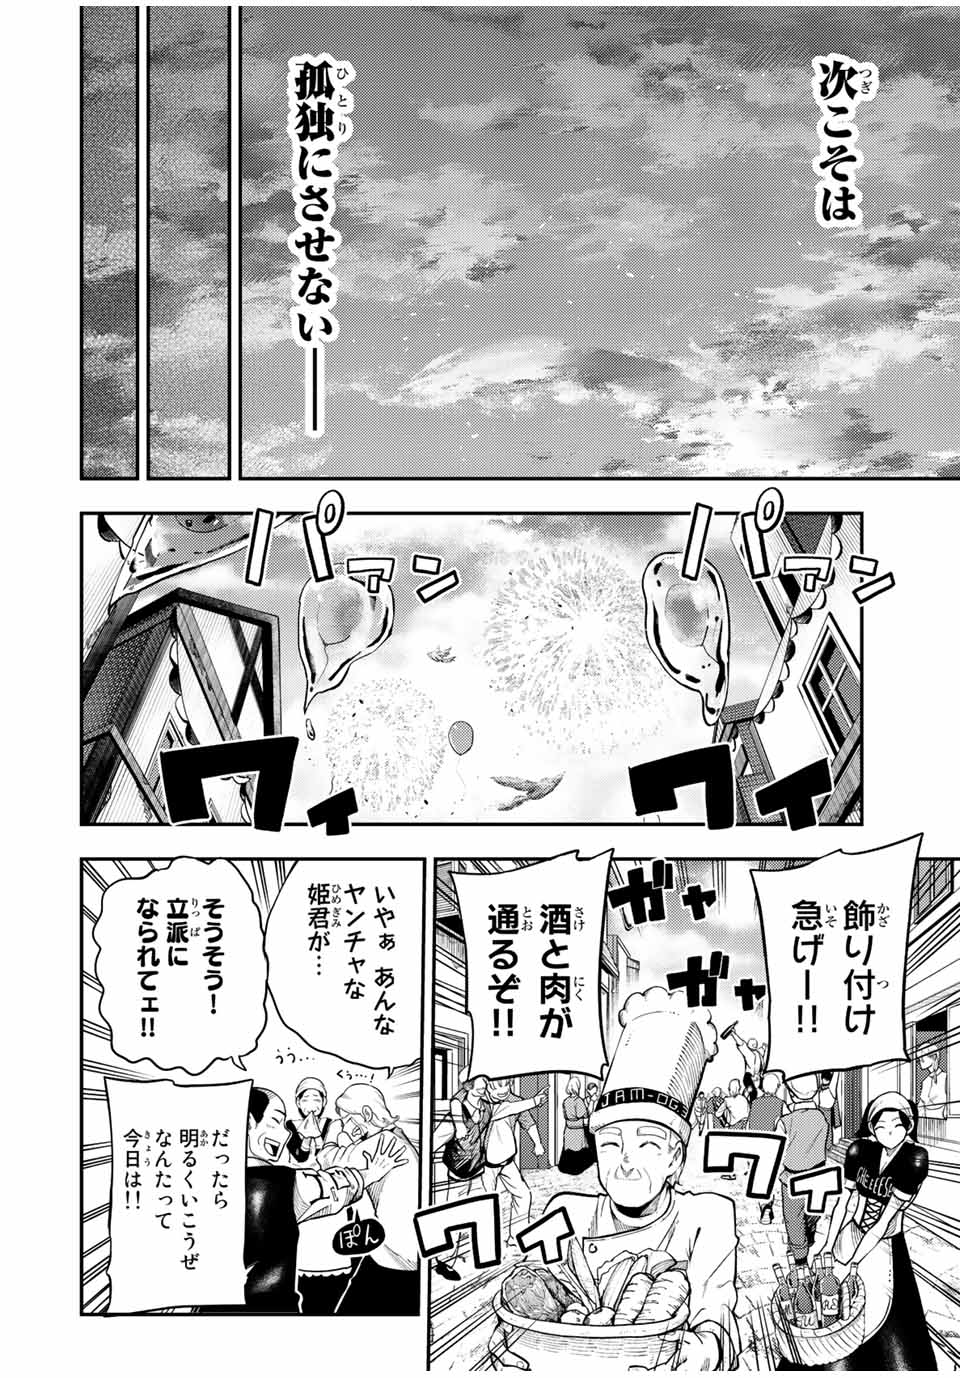 the strongest former prince-; 奴隷転生 ～その奴隷、最強の元王子につき～ 第116話 - Page 8